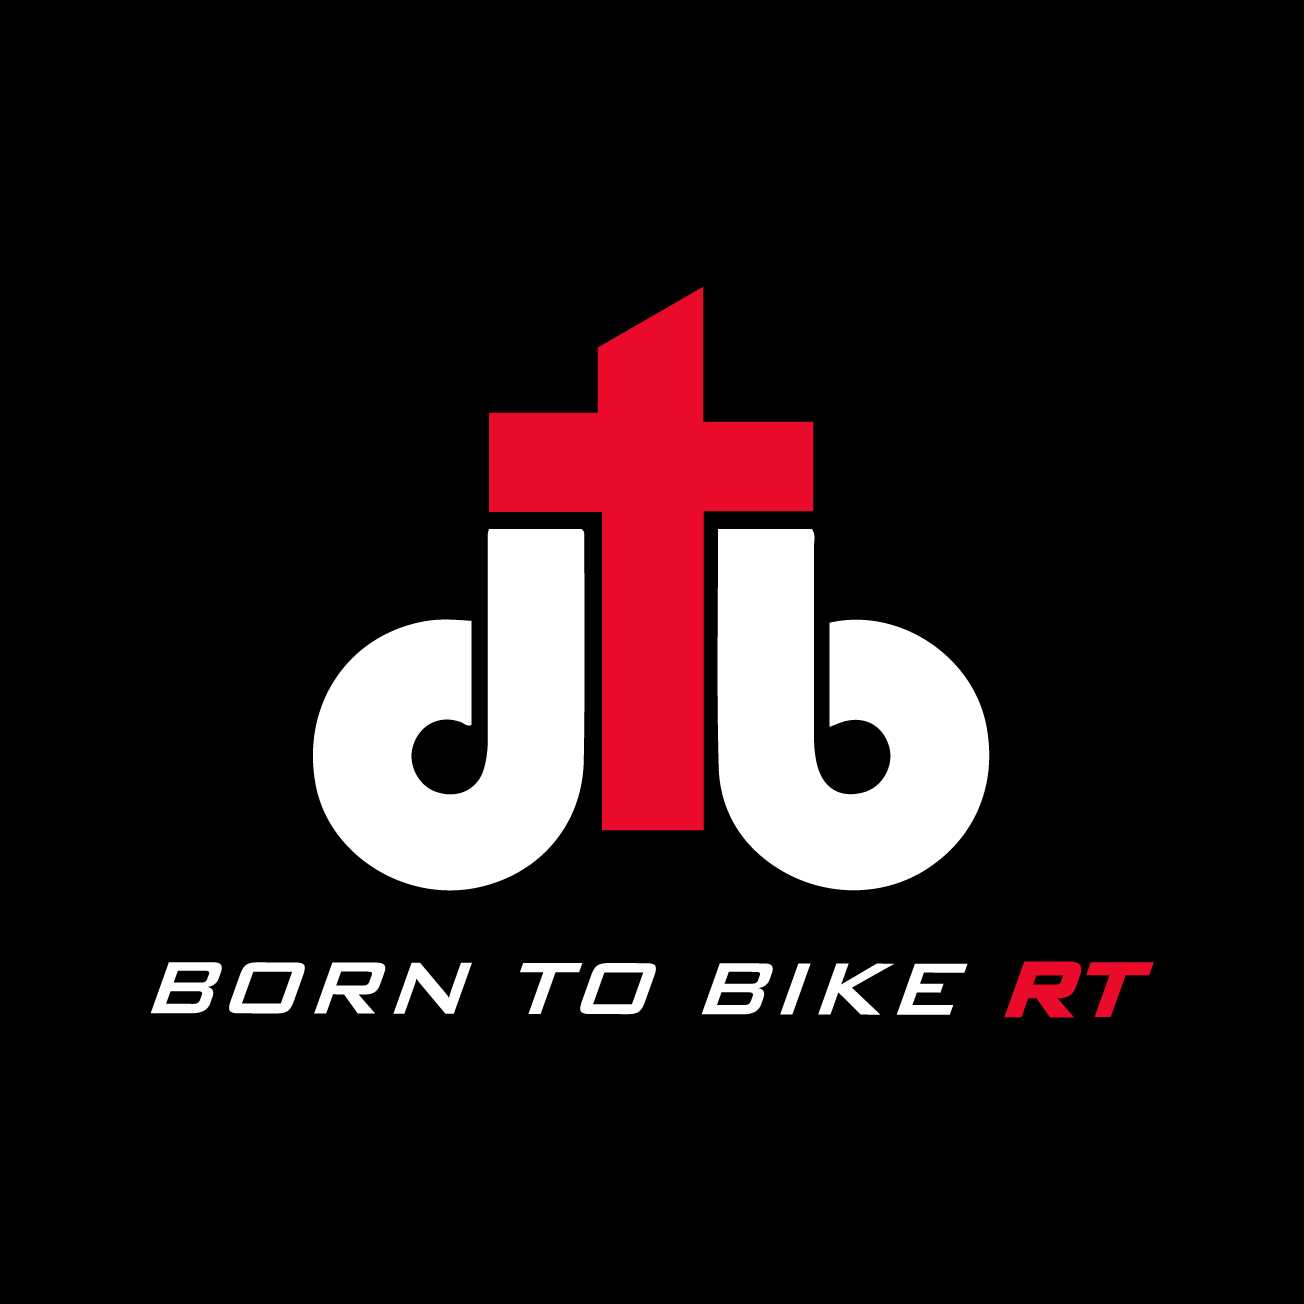 Club Image for BORN TO BIKE